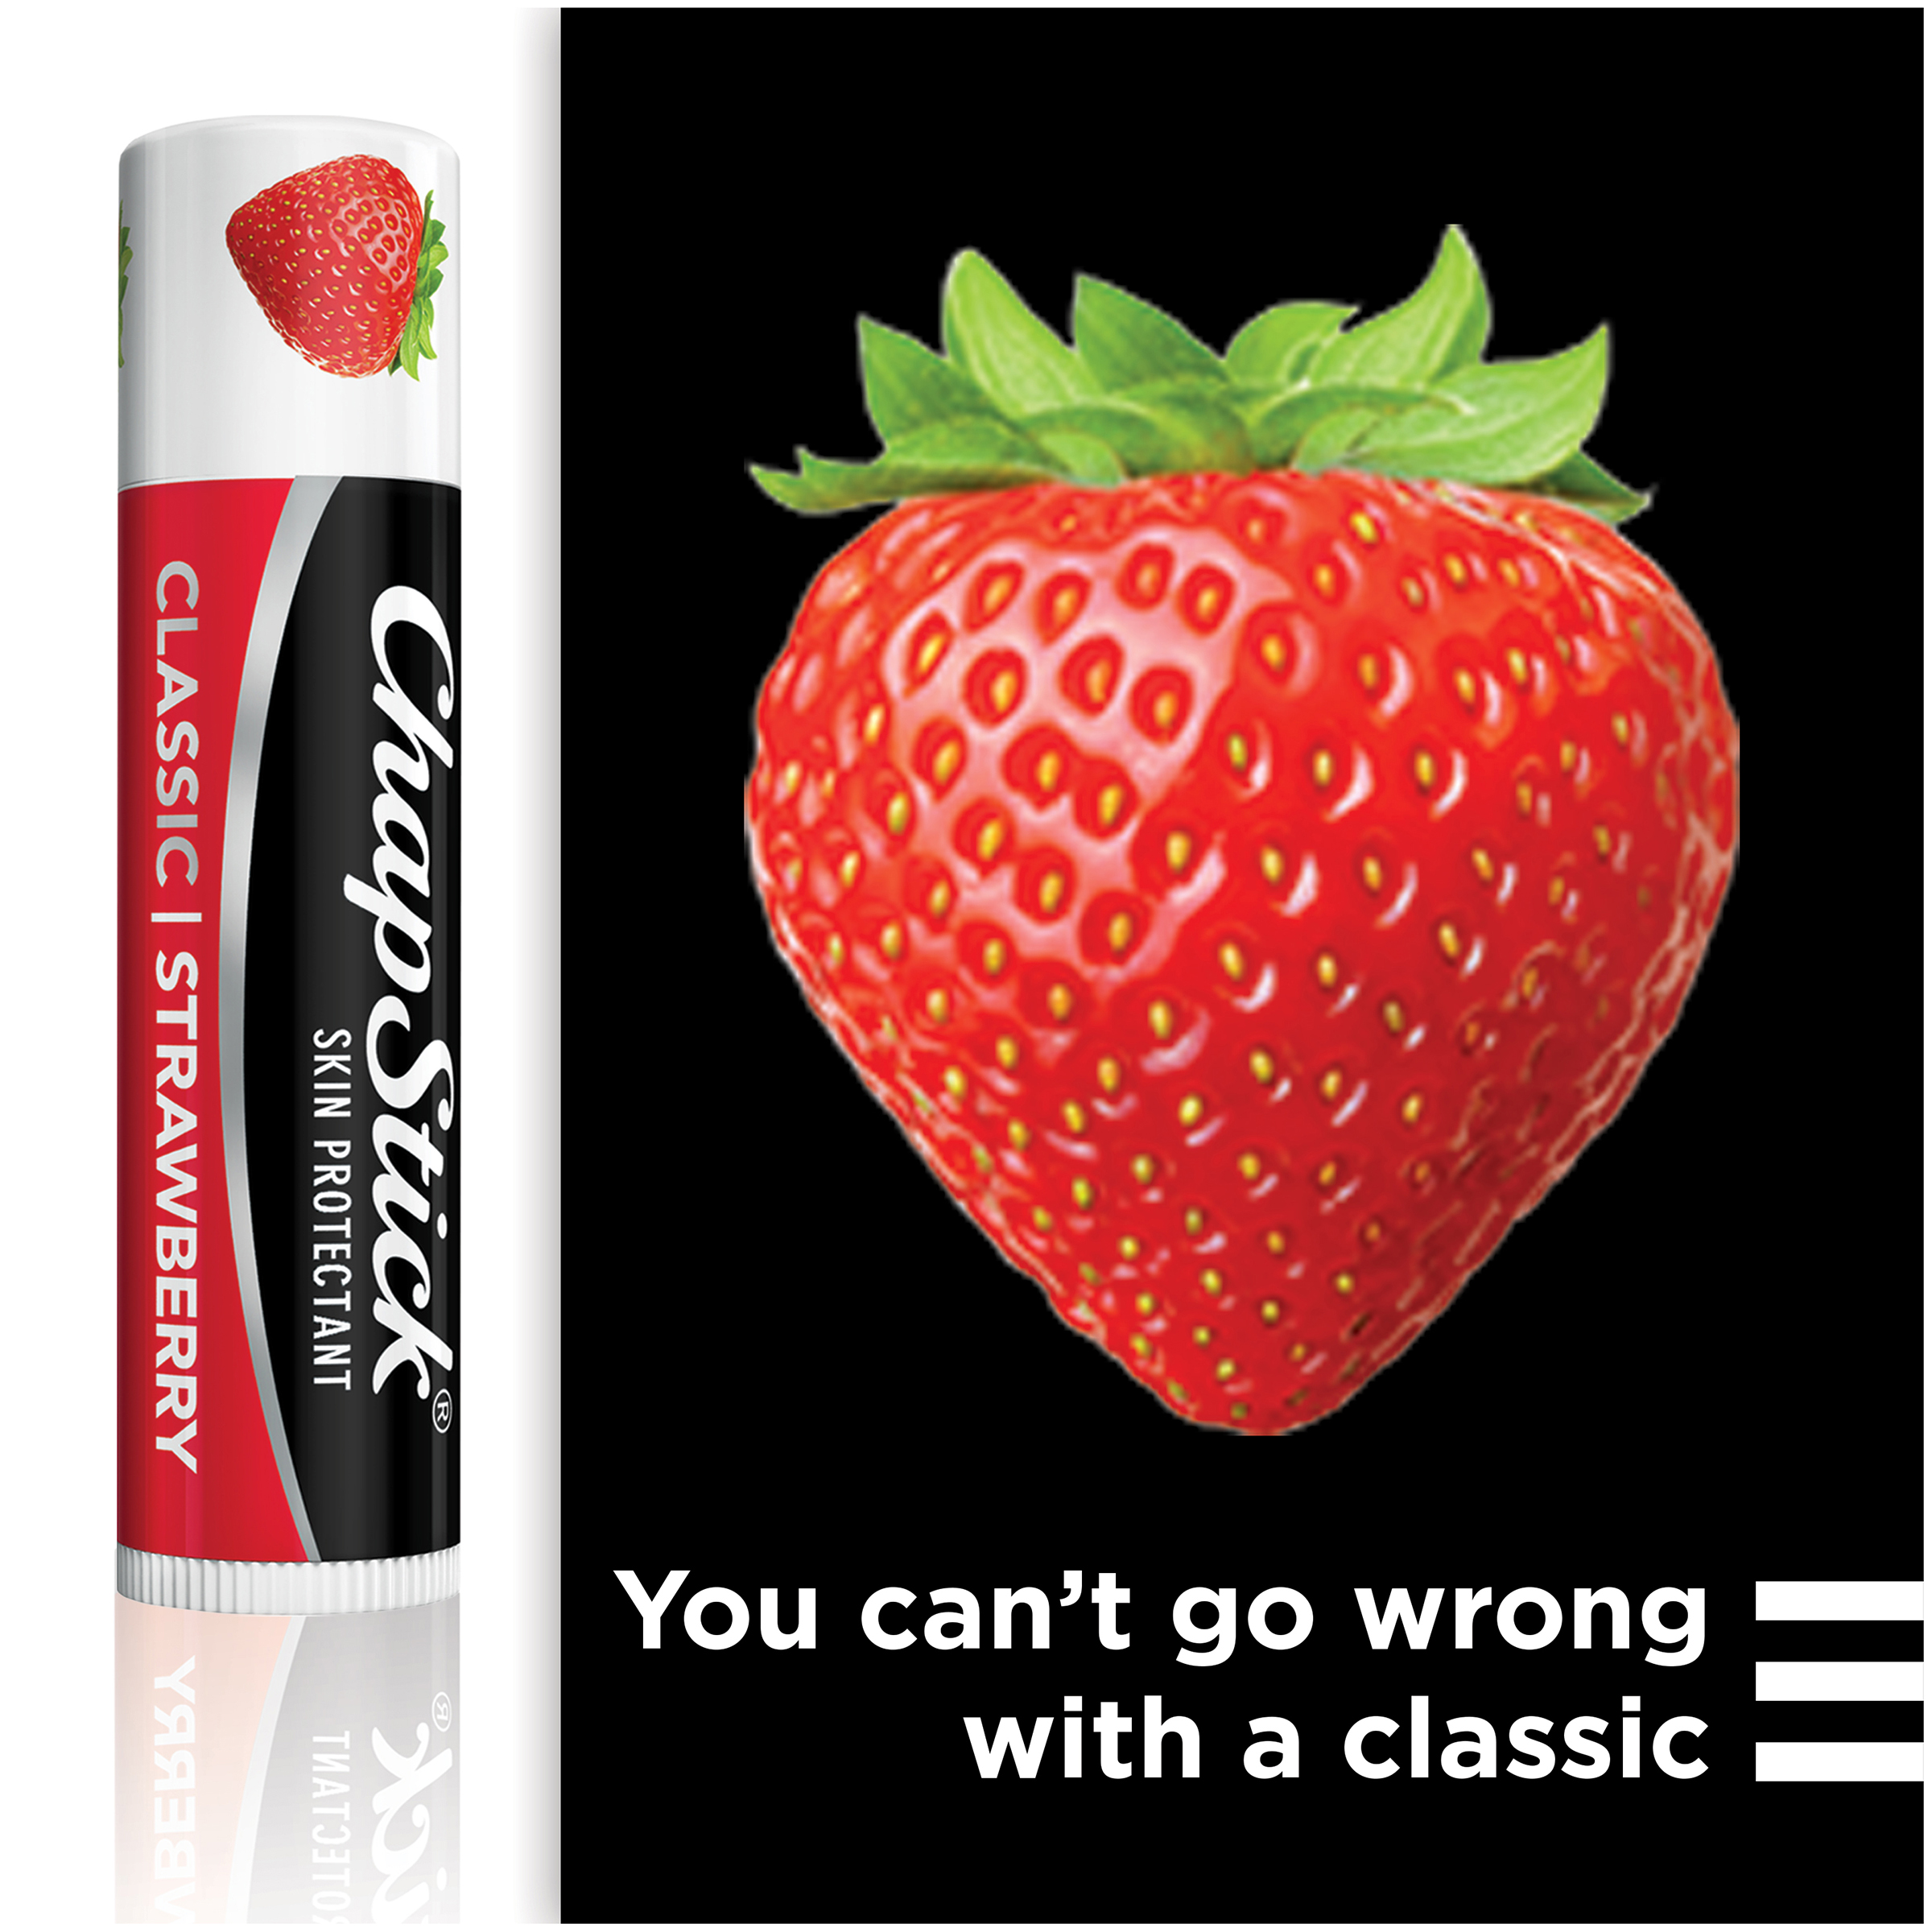 ChapStick Classic Strawberry Lip Balm Tubes - 0.15 oz (Pack of 3) - image 7 of 12